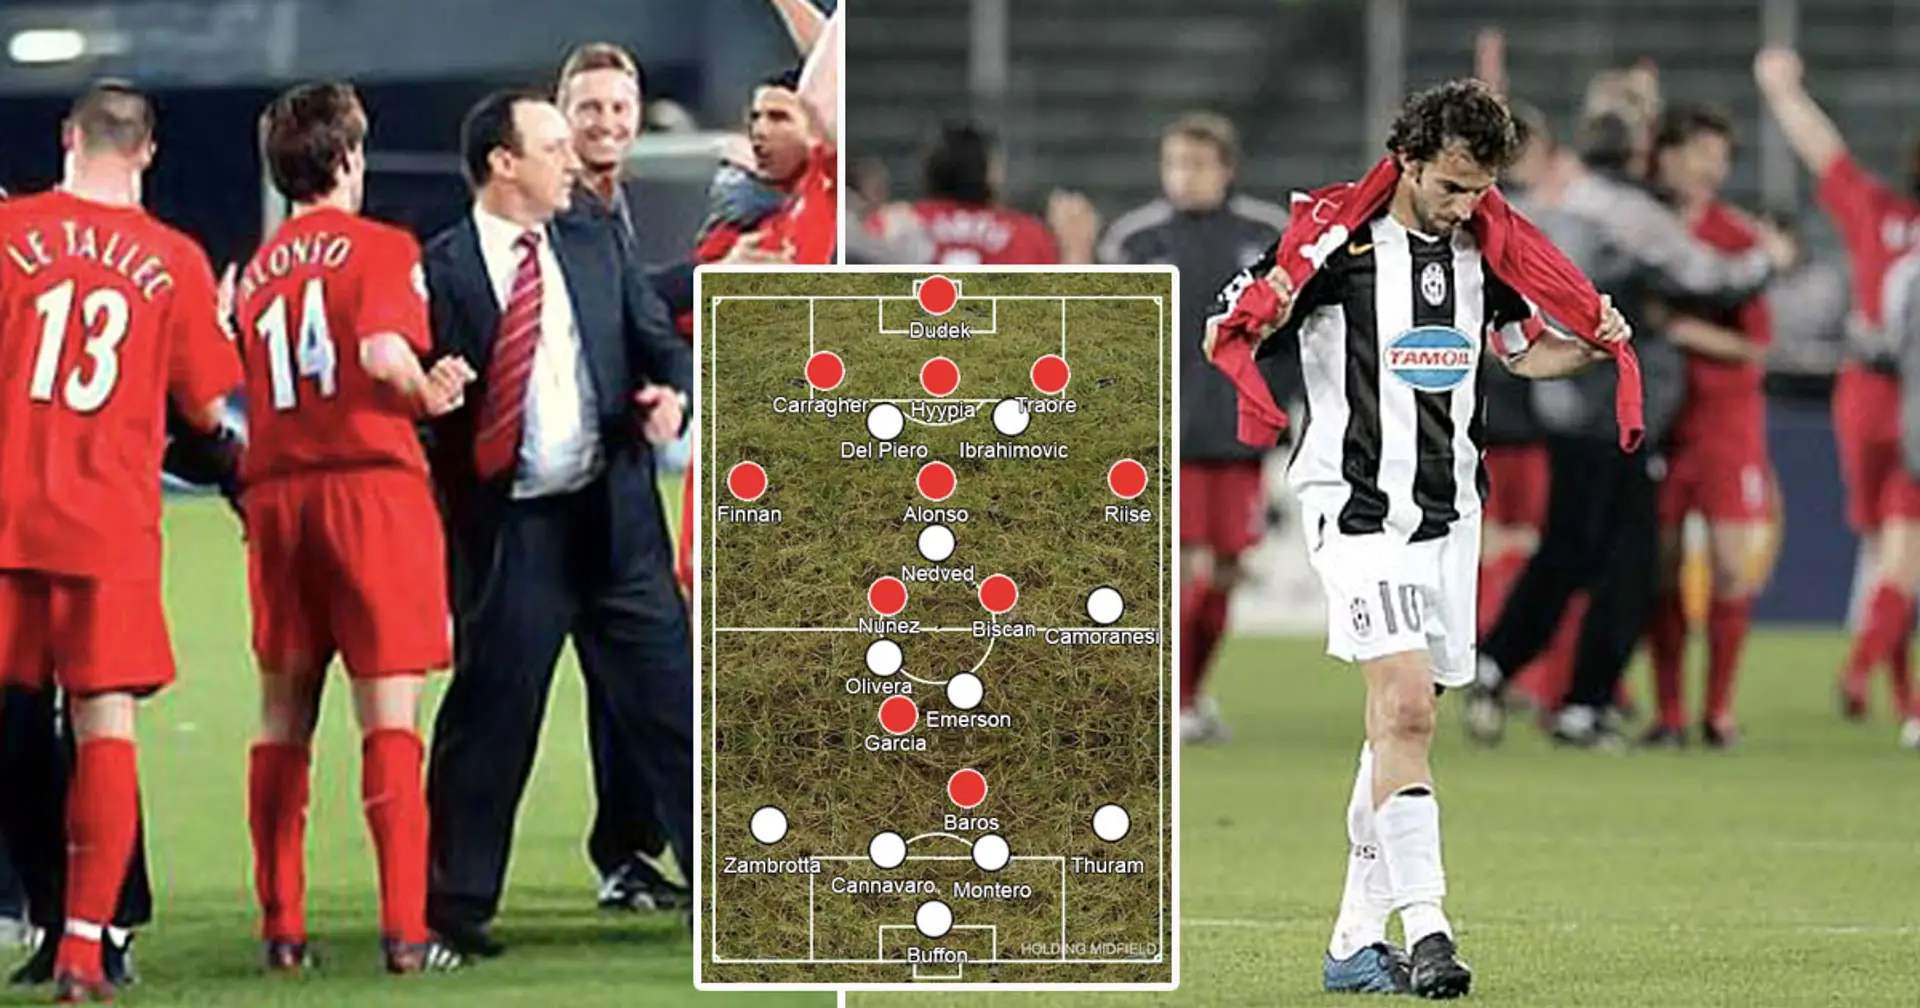 Recalling one tactical tweak on road to Istanbul that made Del Piero and Ibrahimovic useless